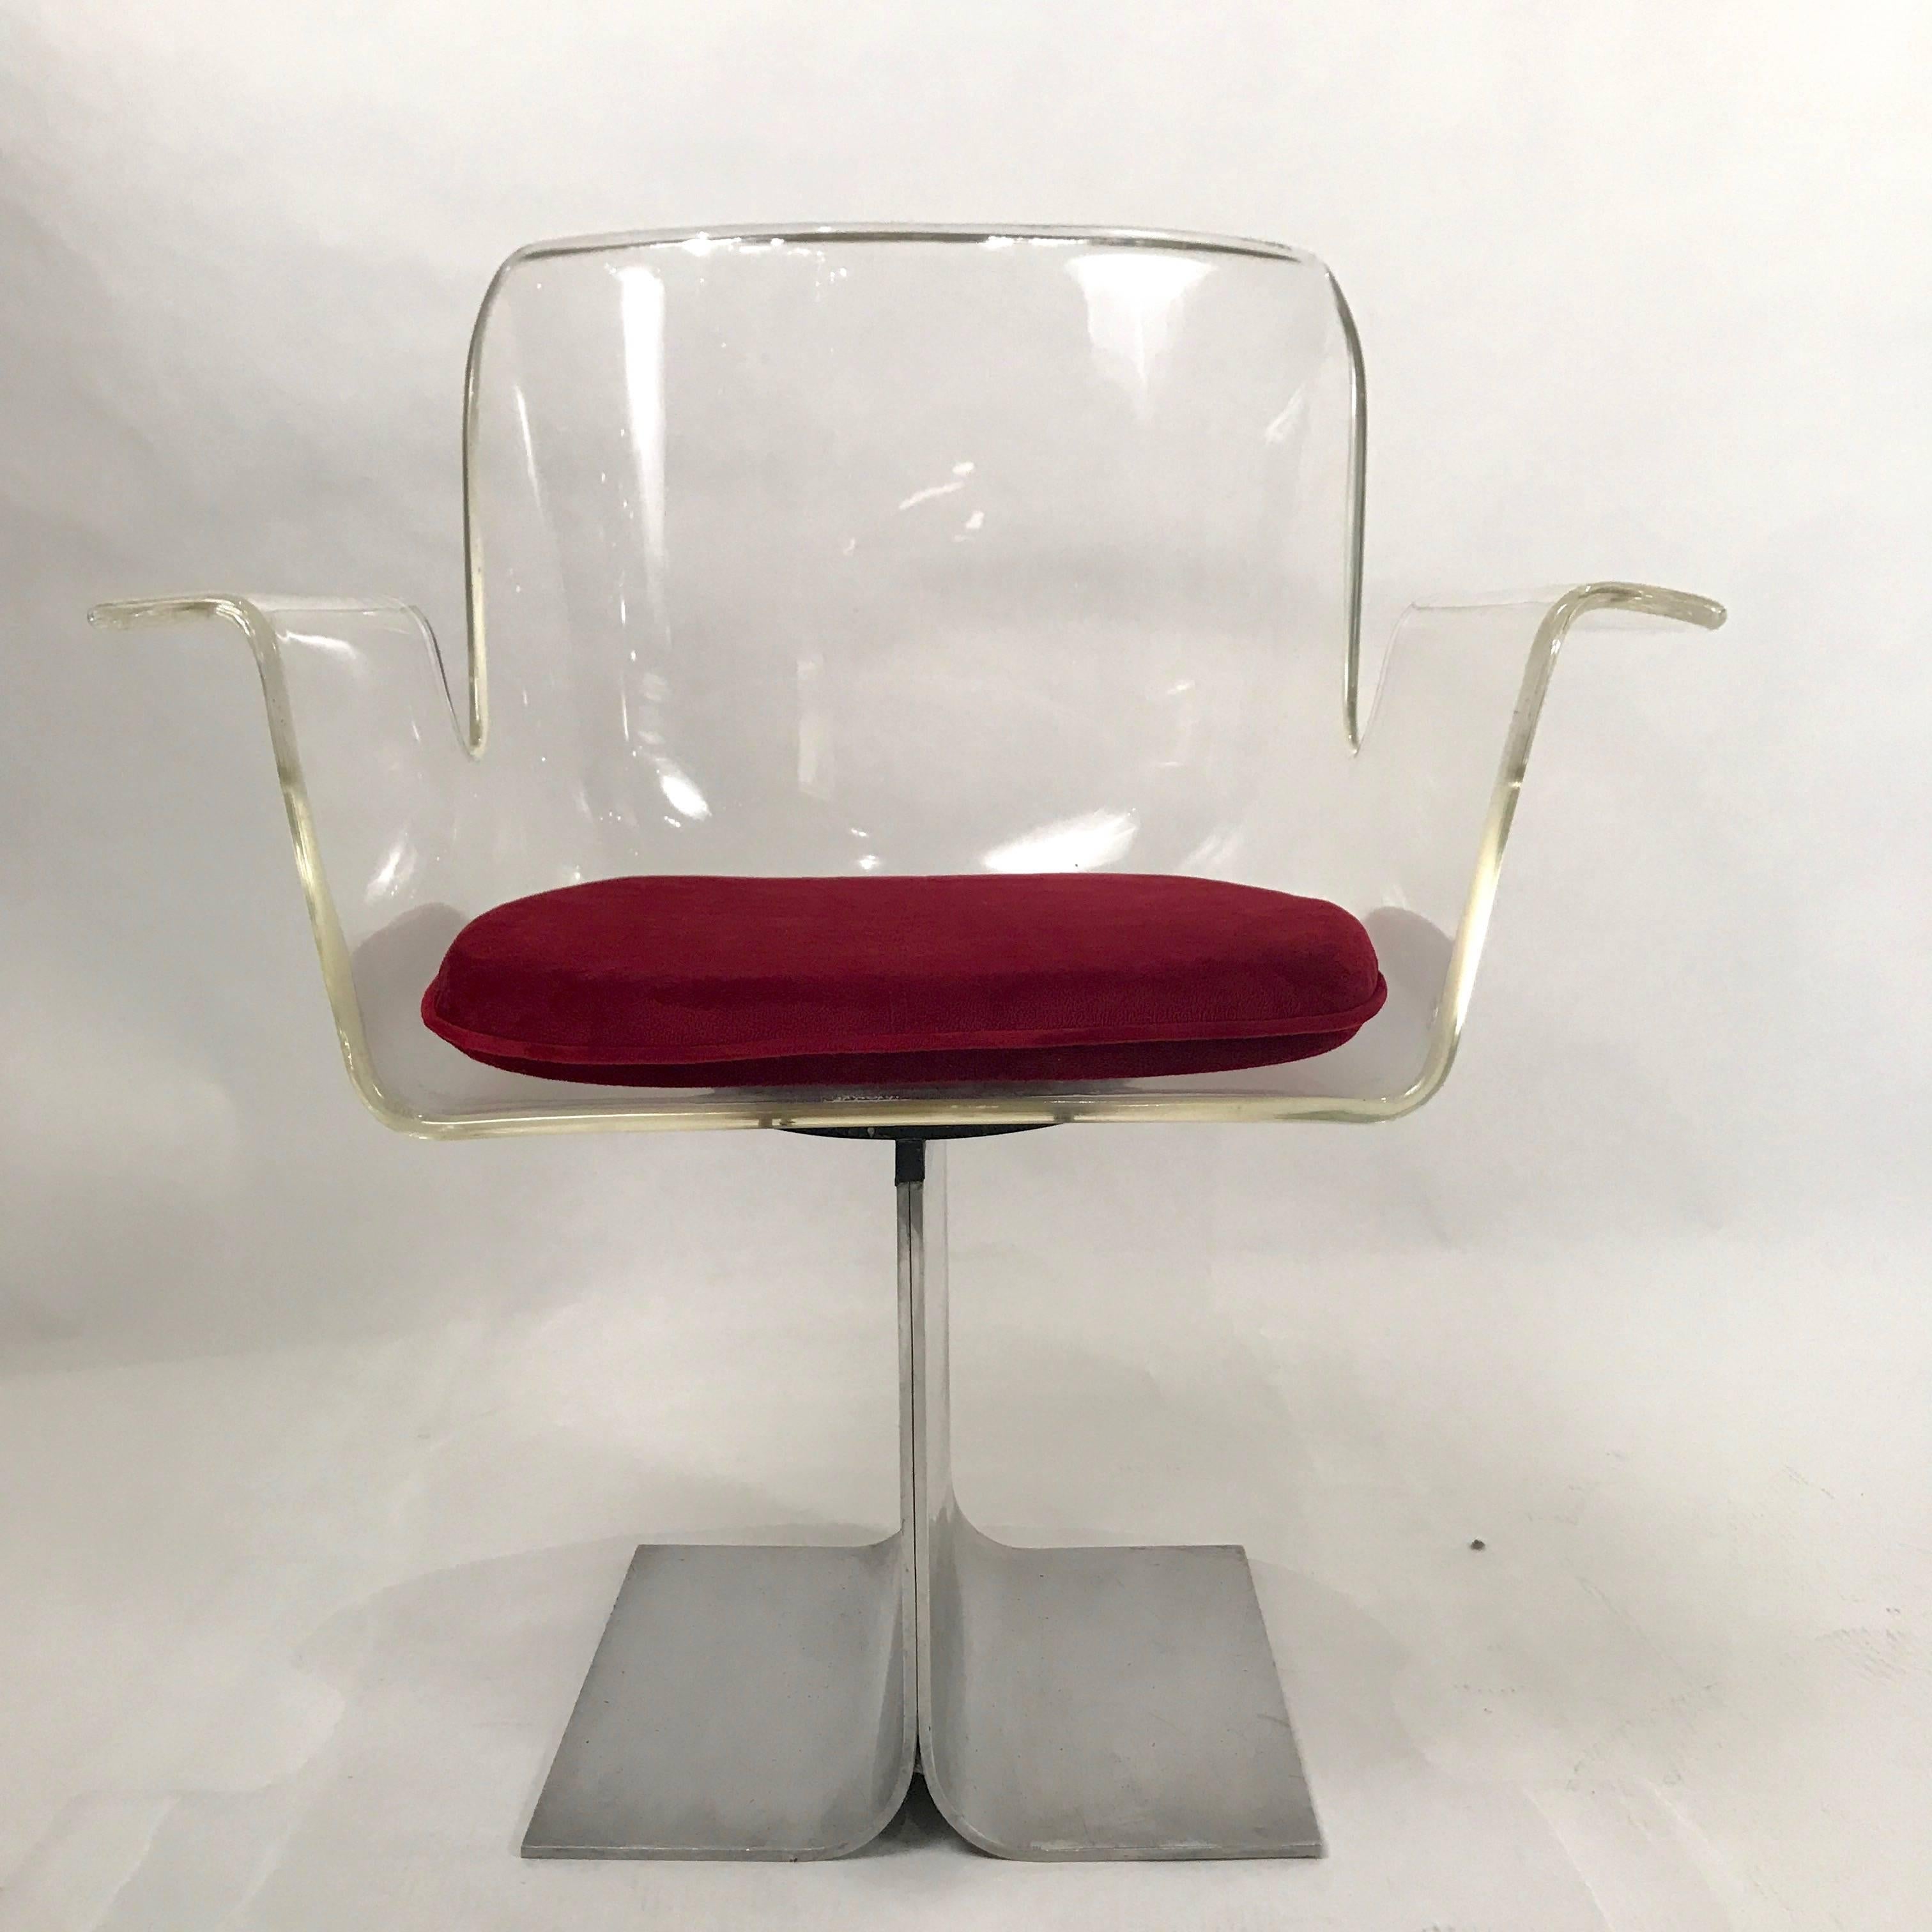 Pair of 171 dining or conference chairs designed by l.M. Rosen for The Pace Collection Inc. These chairs are in great condition. Lucite body with heavy aluminum base. Memory swivel chair - quite comfortable. These chairs make a statement!